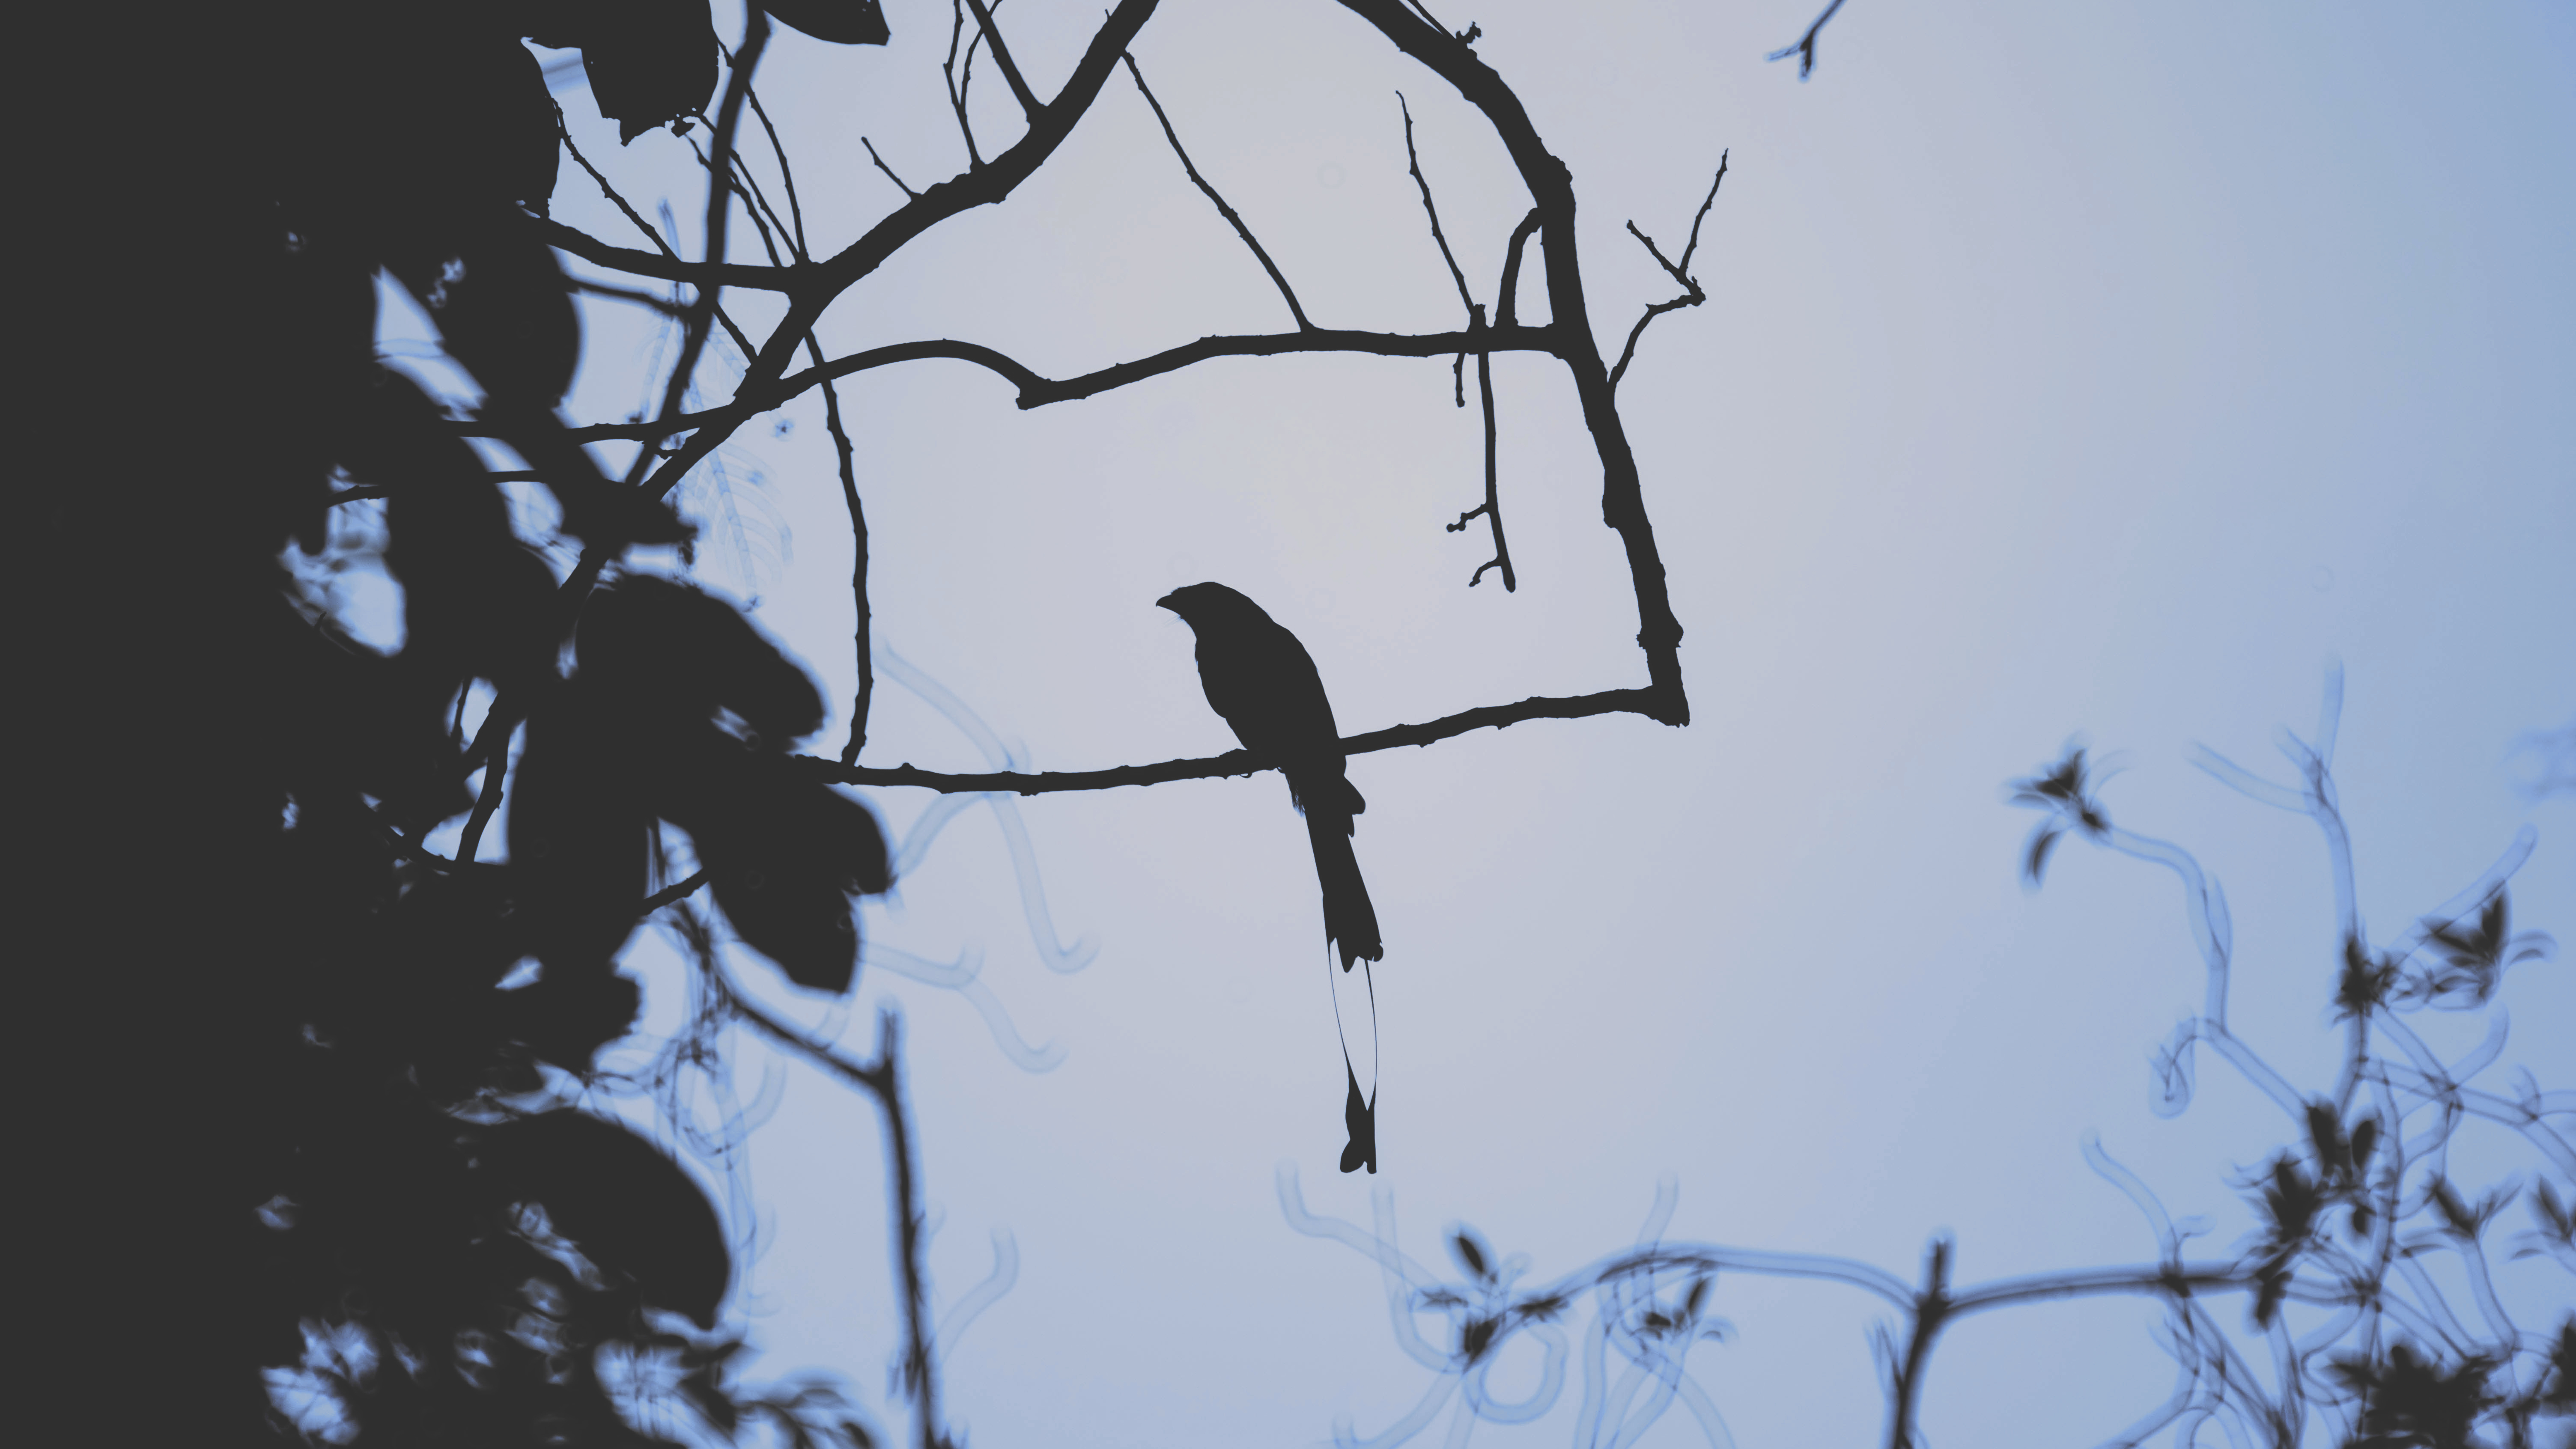 Silhouette Swallow Bird Trees Leaves Blue Low Saturation Chuttersnap 6016x3385